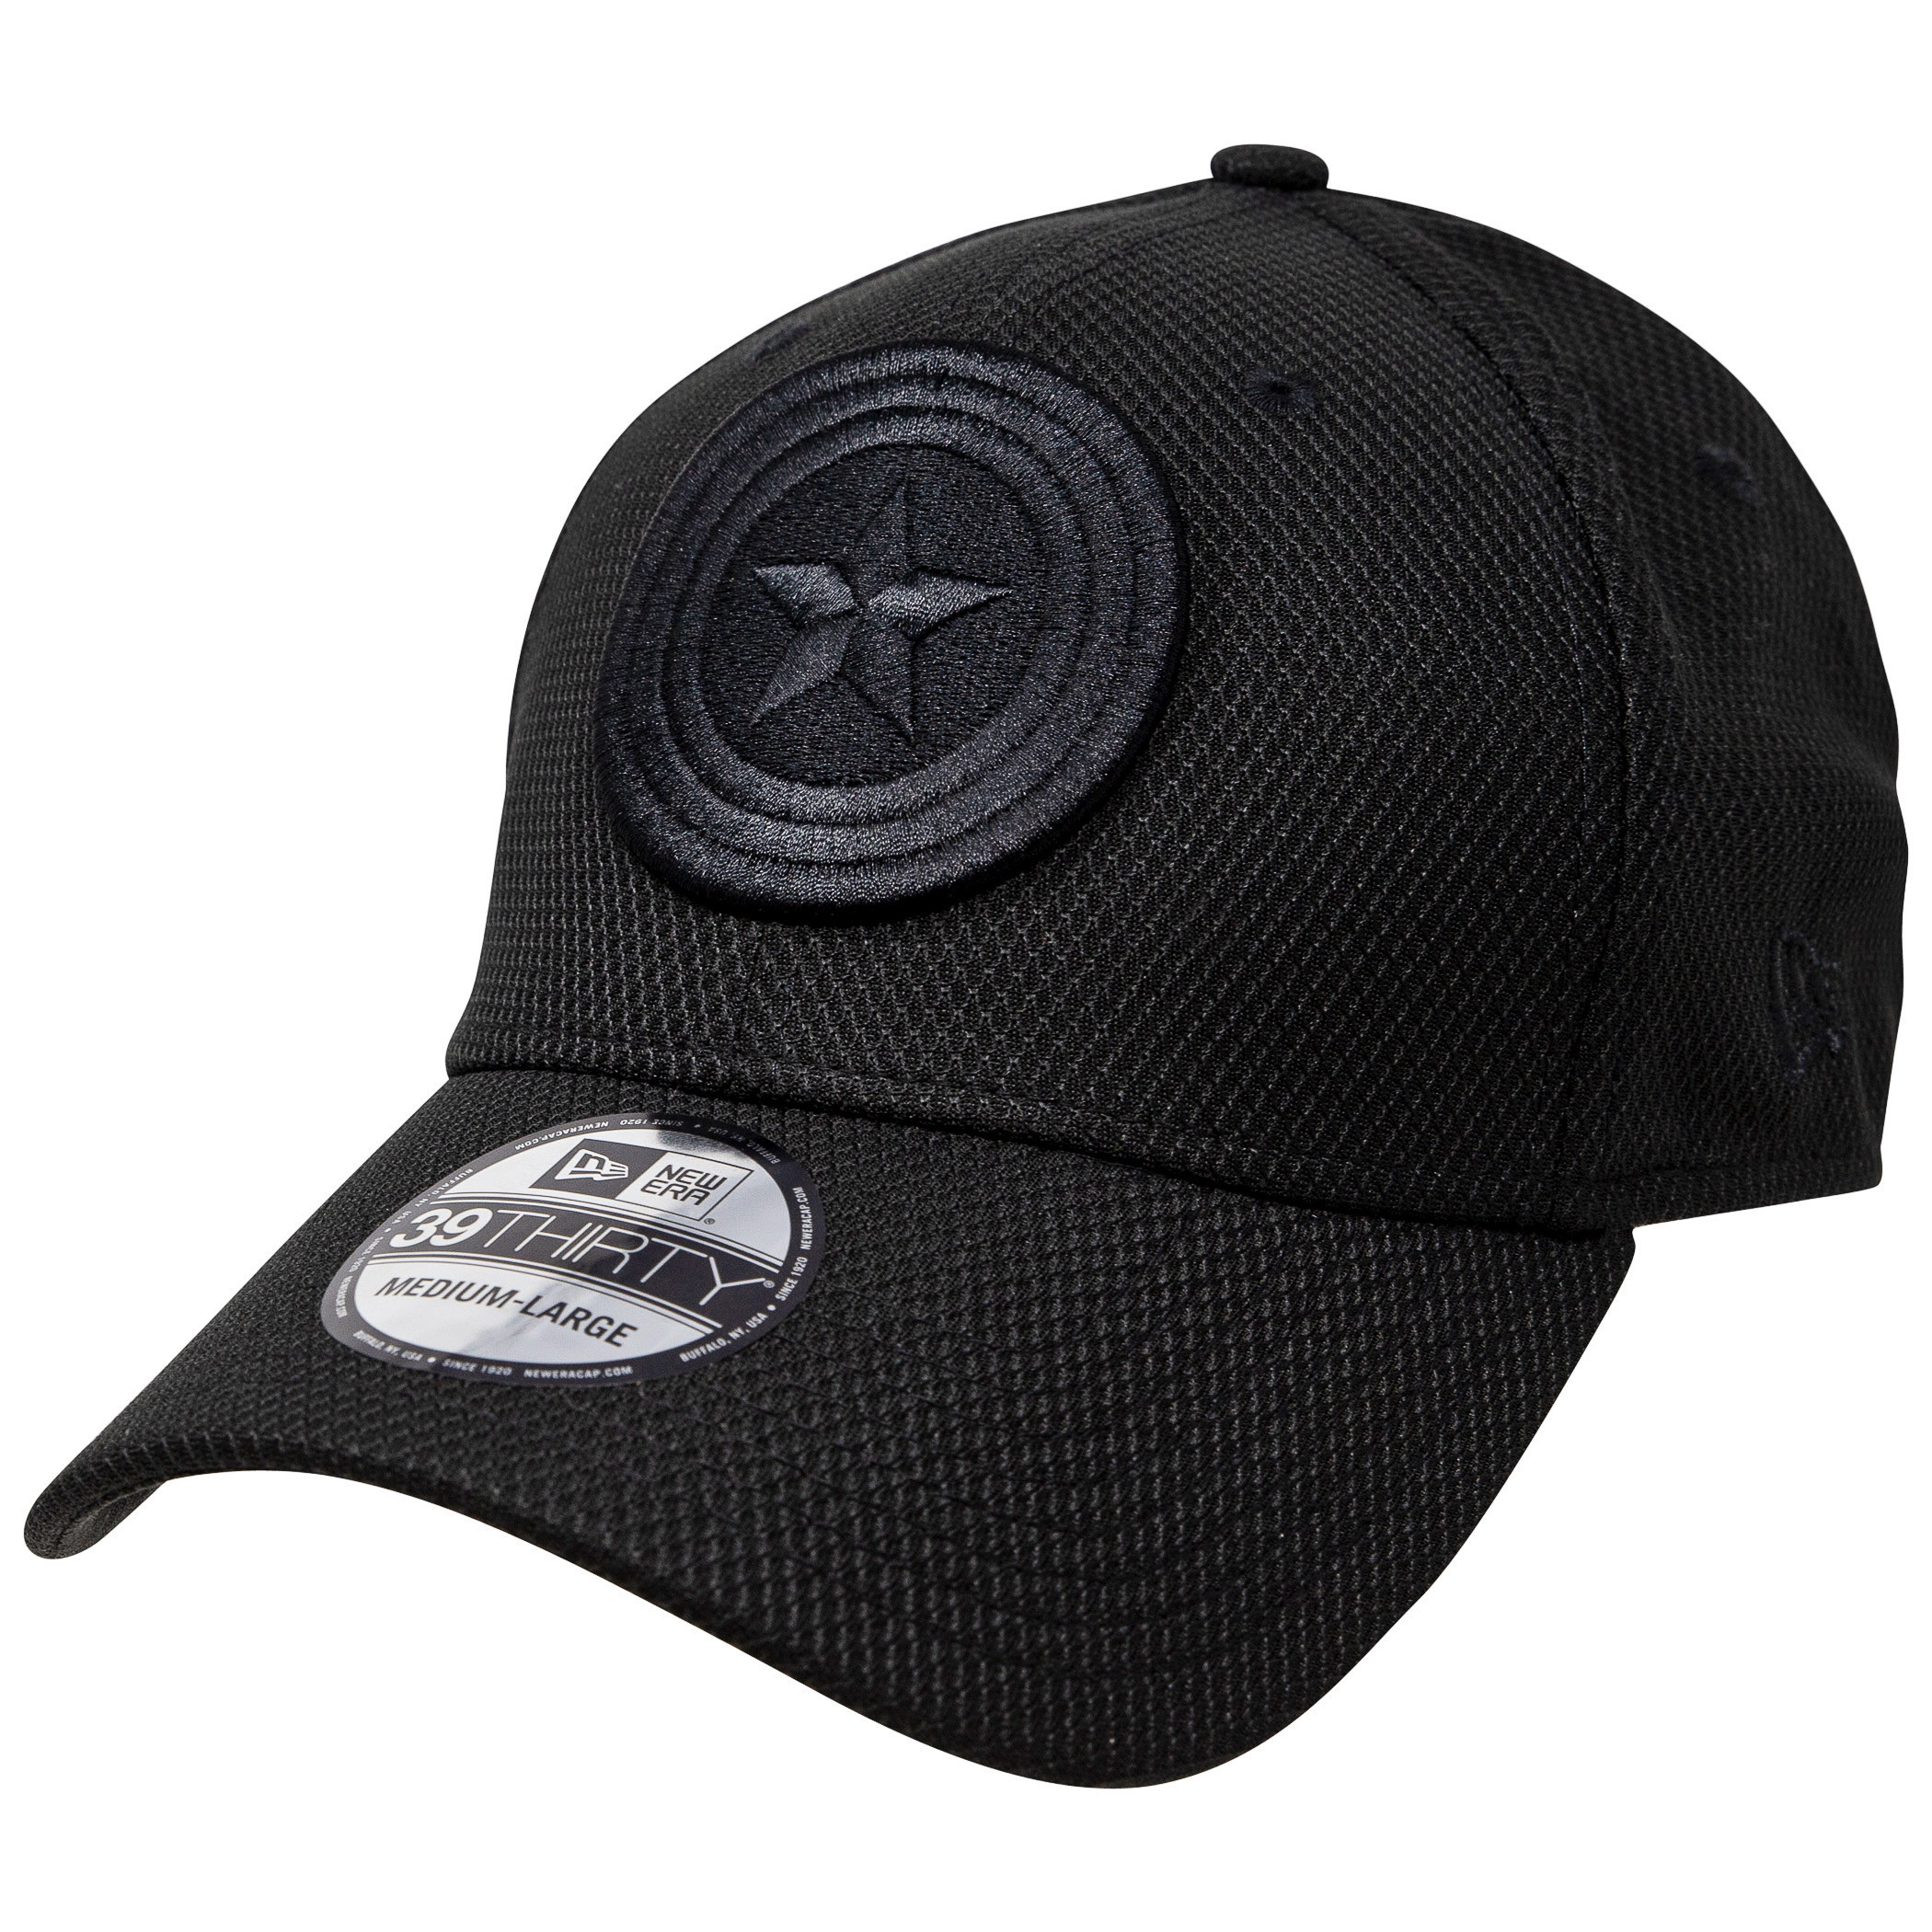 Marvel Avengers Black on Black 3930 Hat Collection by New Era